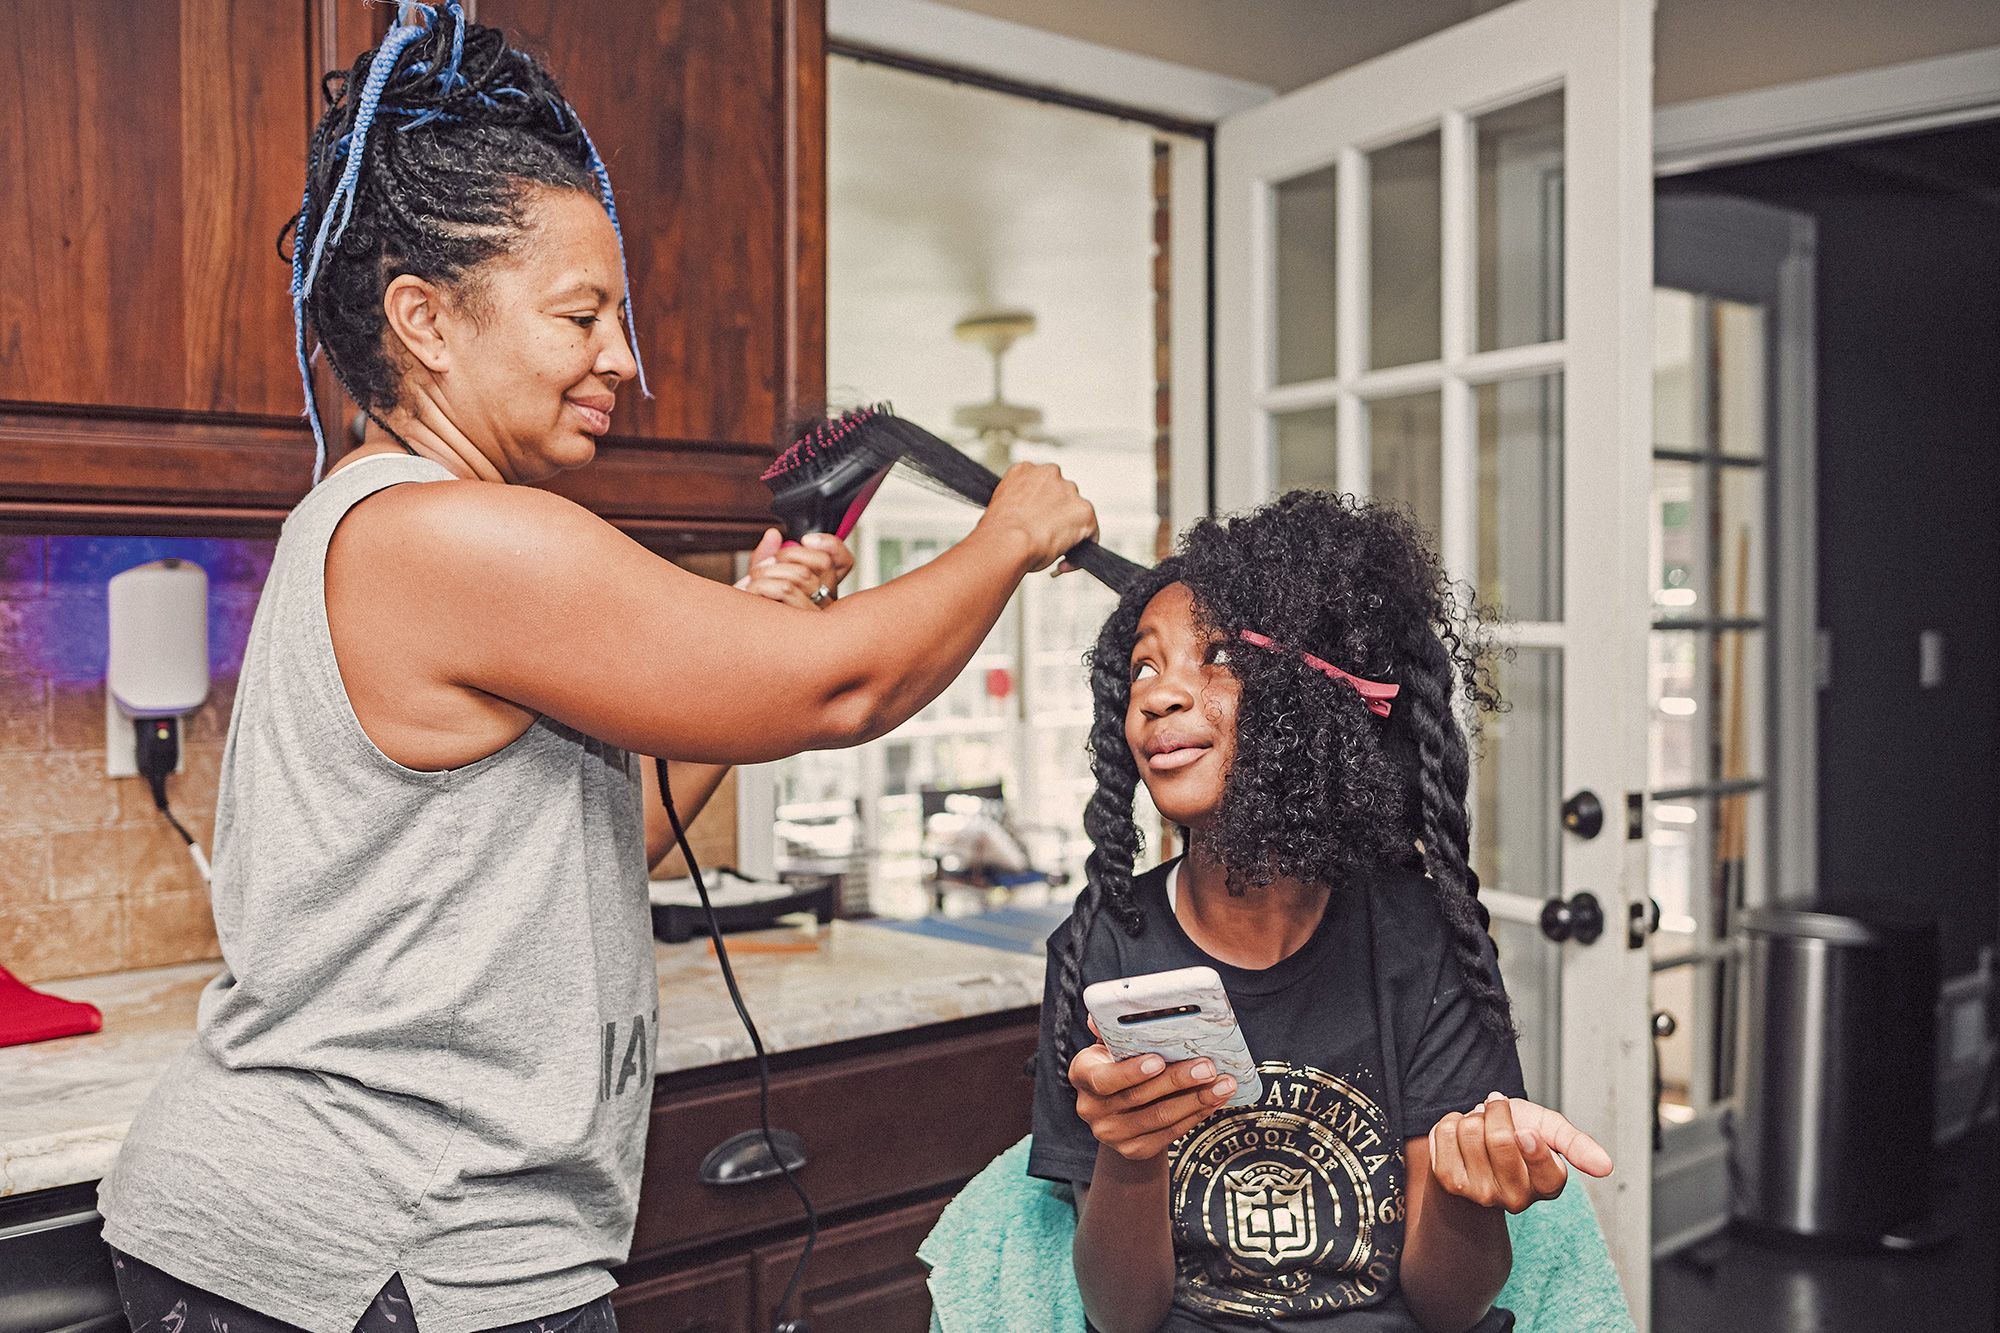 The "Wash Day' routine — which can last from a few hours to days plural — usually includes a pre-wash and de-tangle, a wash, a deep condition, a leave-in conditioner (and oil) and then styling to finish.